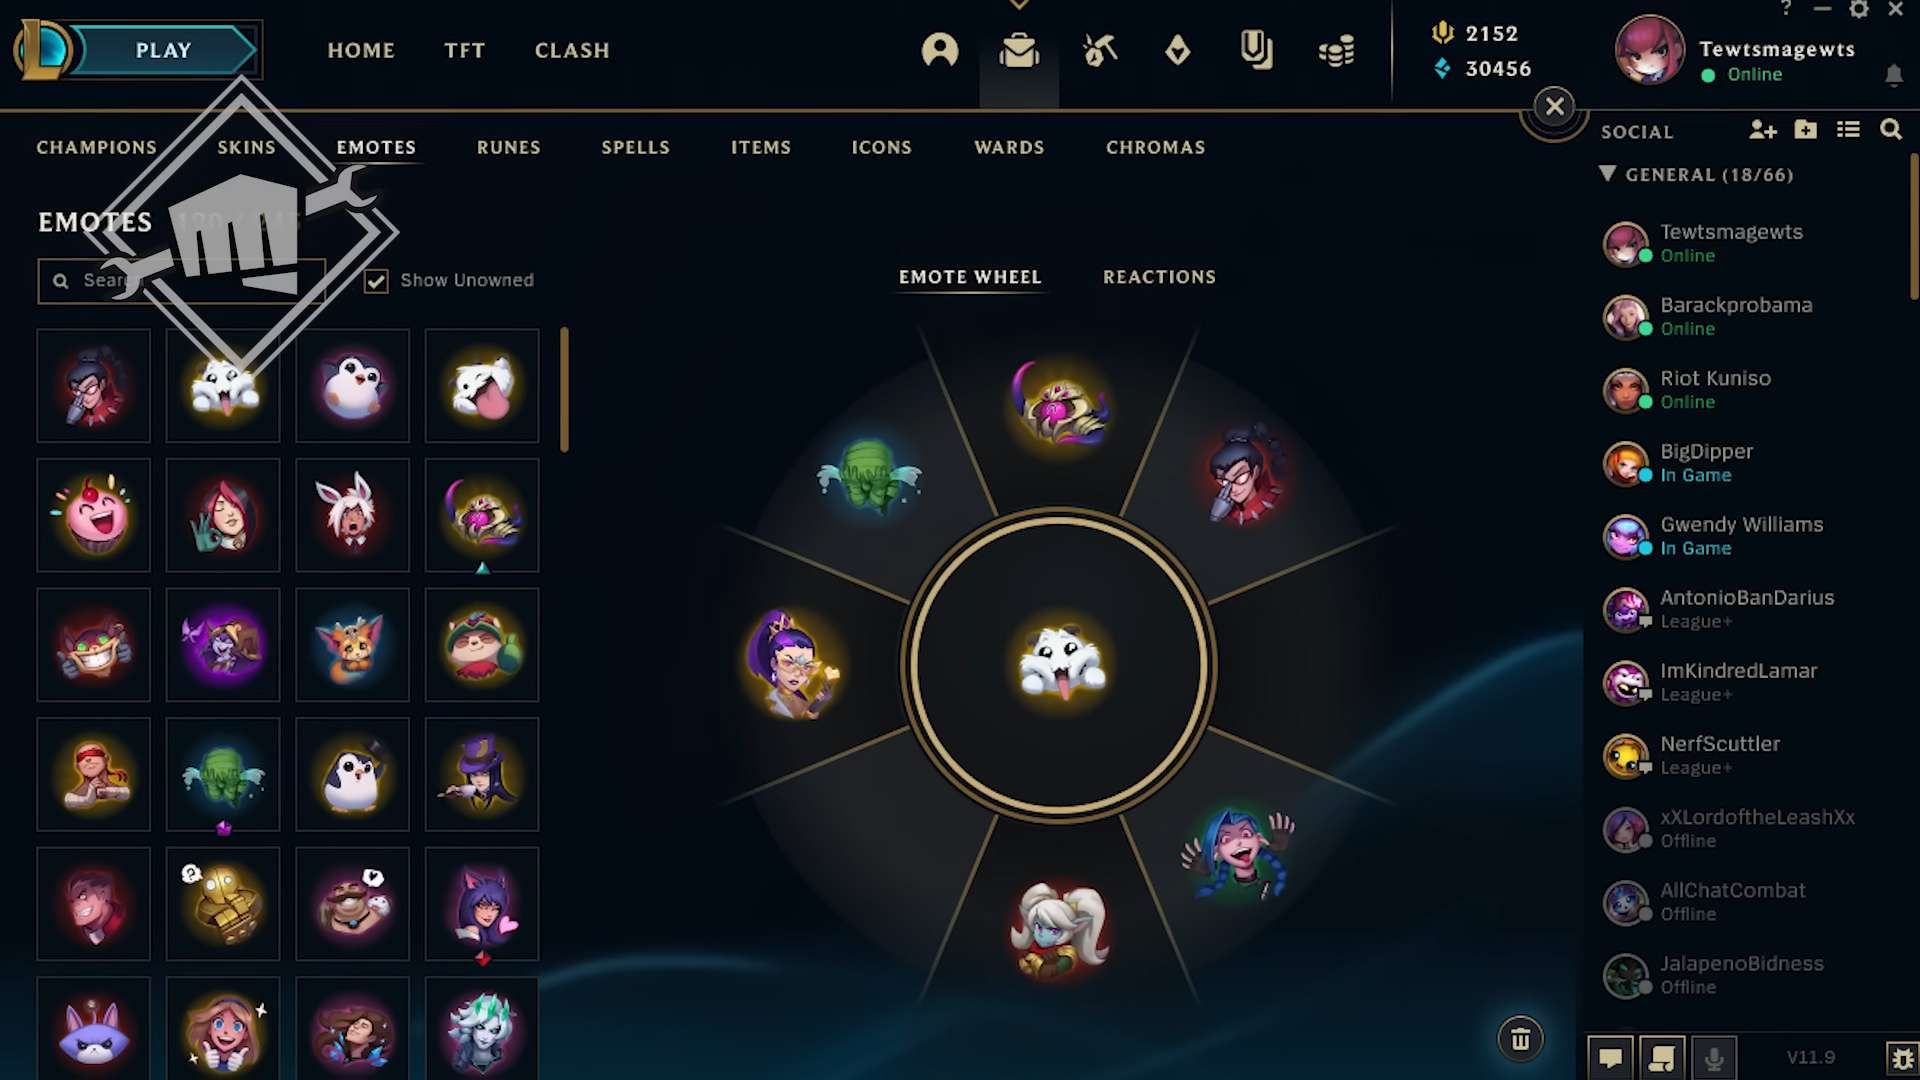 Fans discovered Riot ‘dividing the tier’ for Emotes, suspecting the price is about to increase